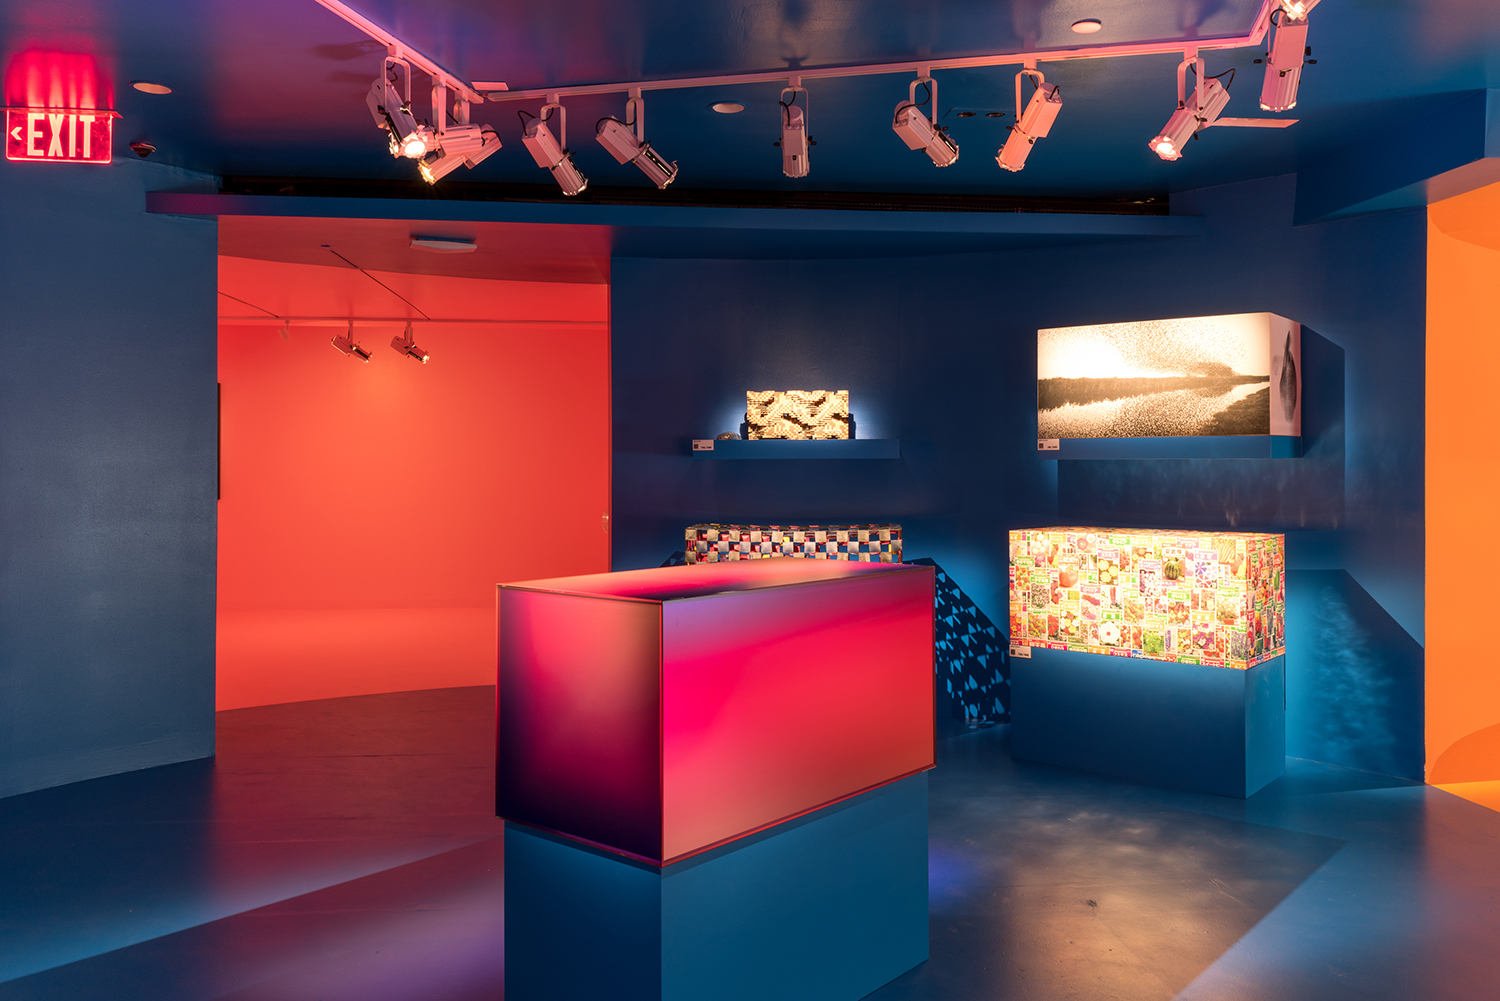 Benoit-Louis Vuitton shares his top picks from 200 Trunks 200 Visionaries:  The Exhibition